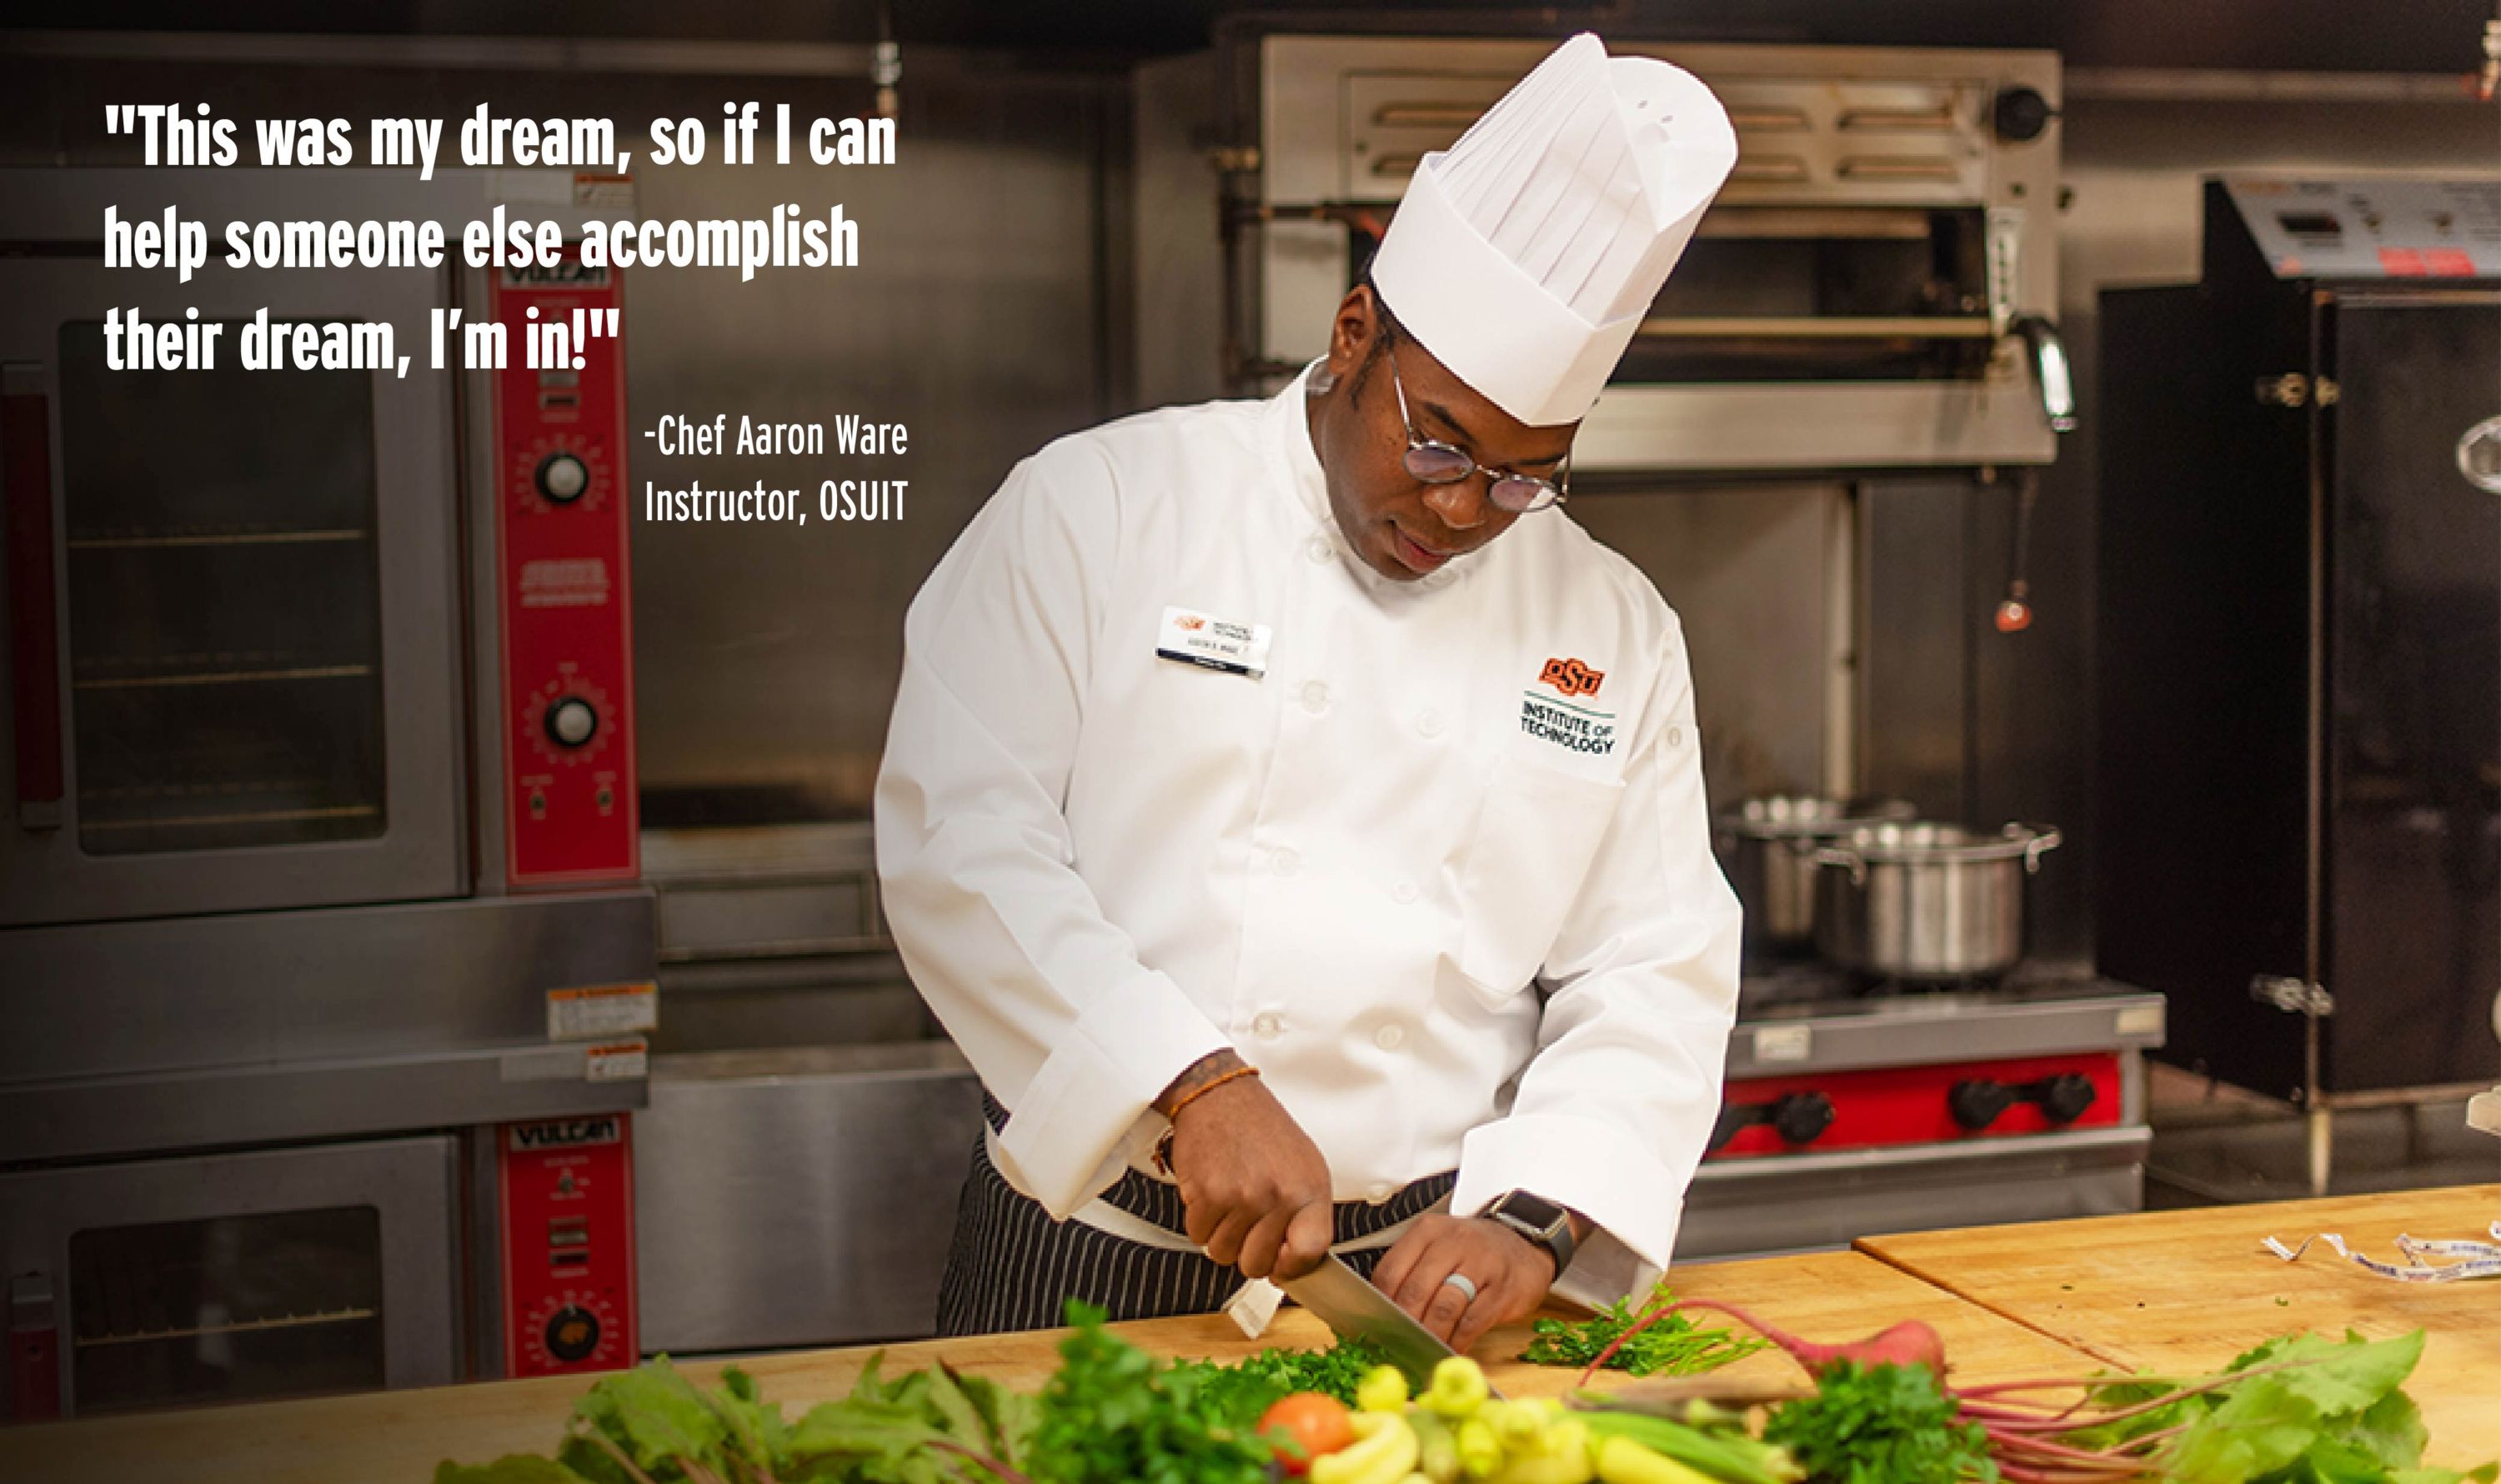 Culinary arts offer Oklahomans a fulfilling future for those interested in the hospitality industry.  Tuesday, September 7, 2021